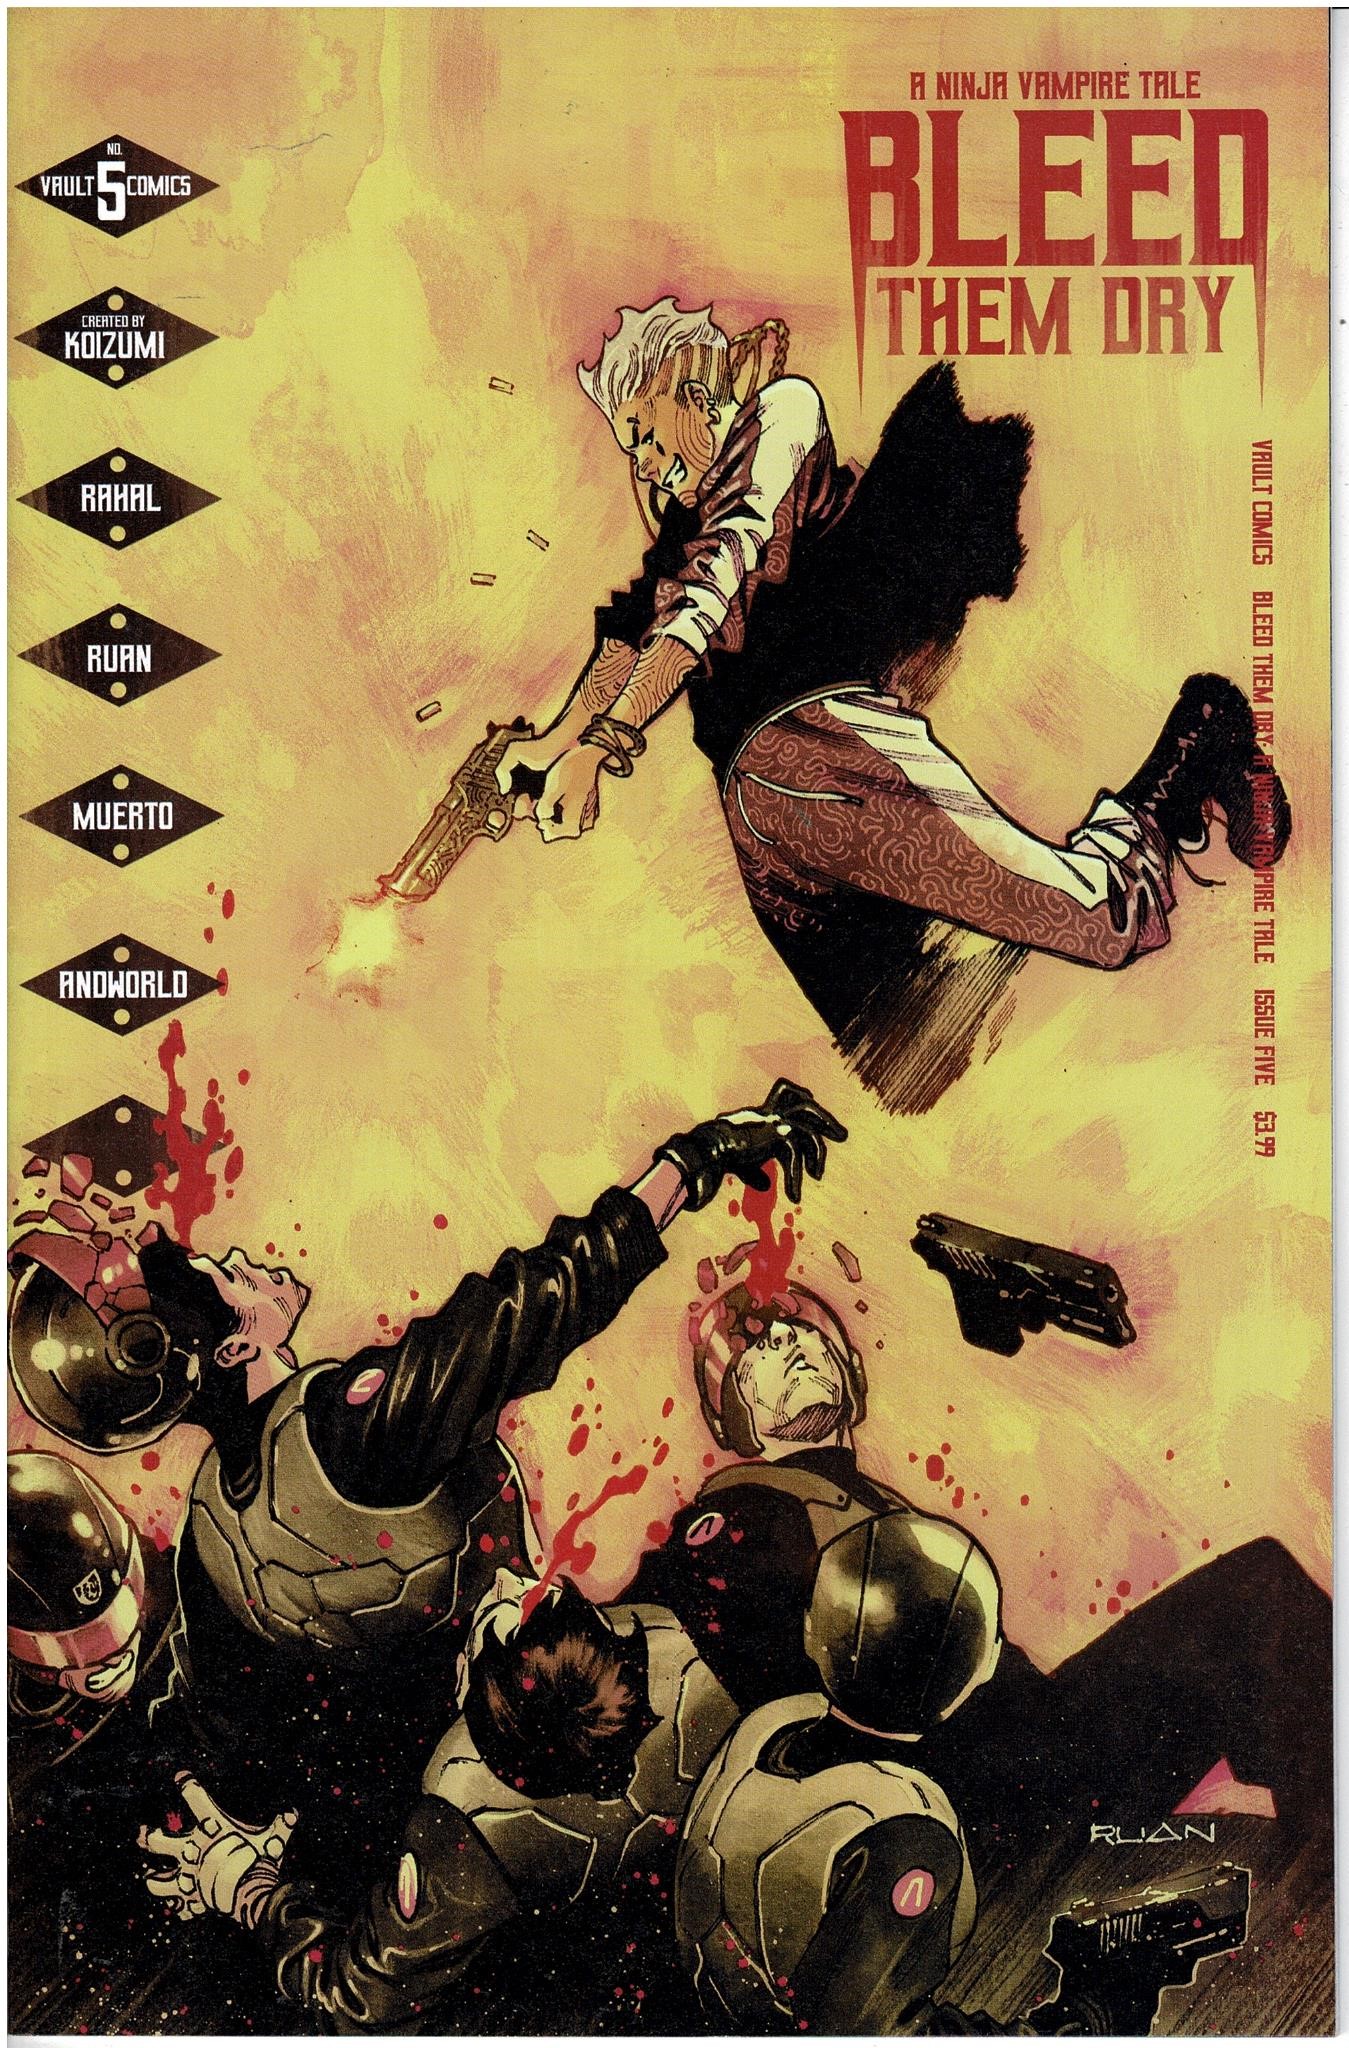 Bleed Them Dry #5 Cover A Ruan